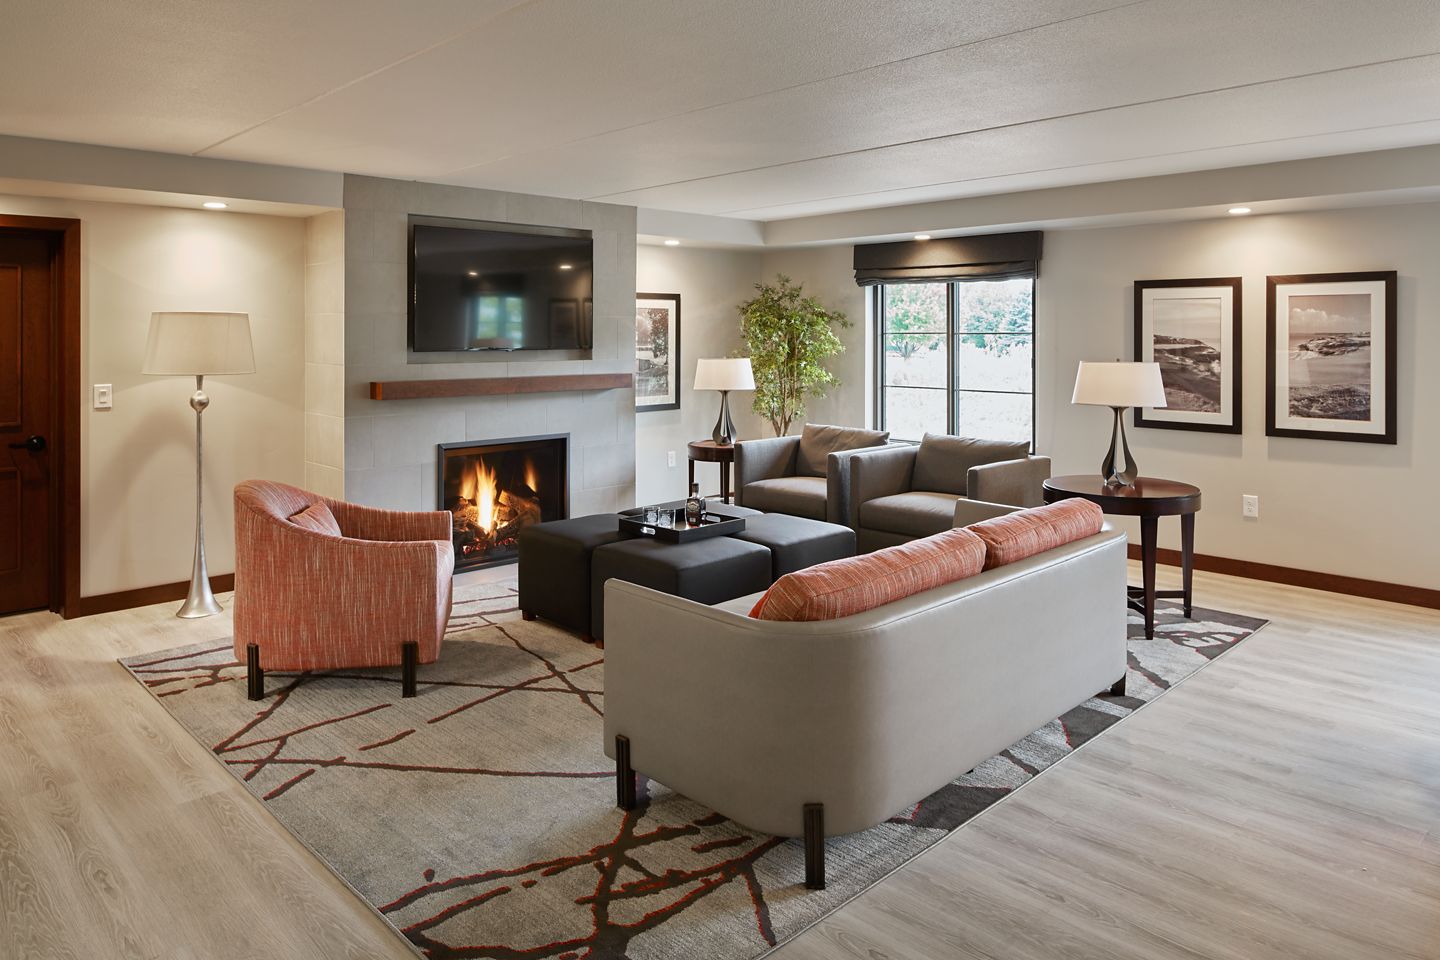 A view of the fireplace and seating area surrounding it in The Horizon Suite at The Inn on Woodlake